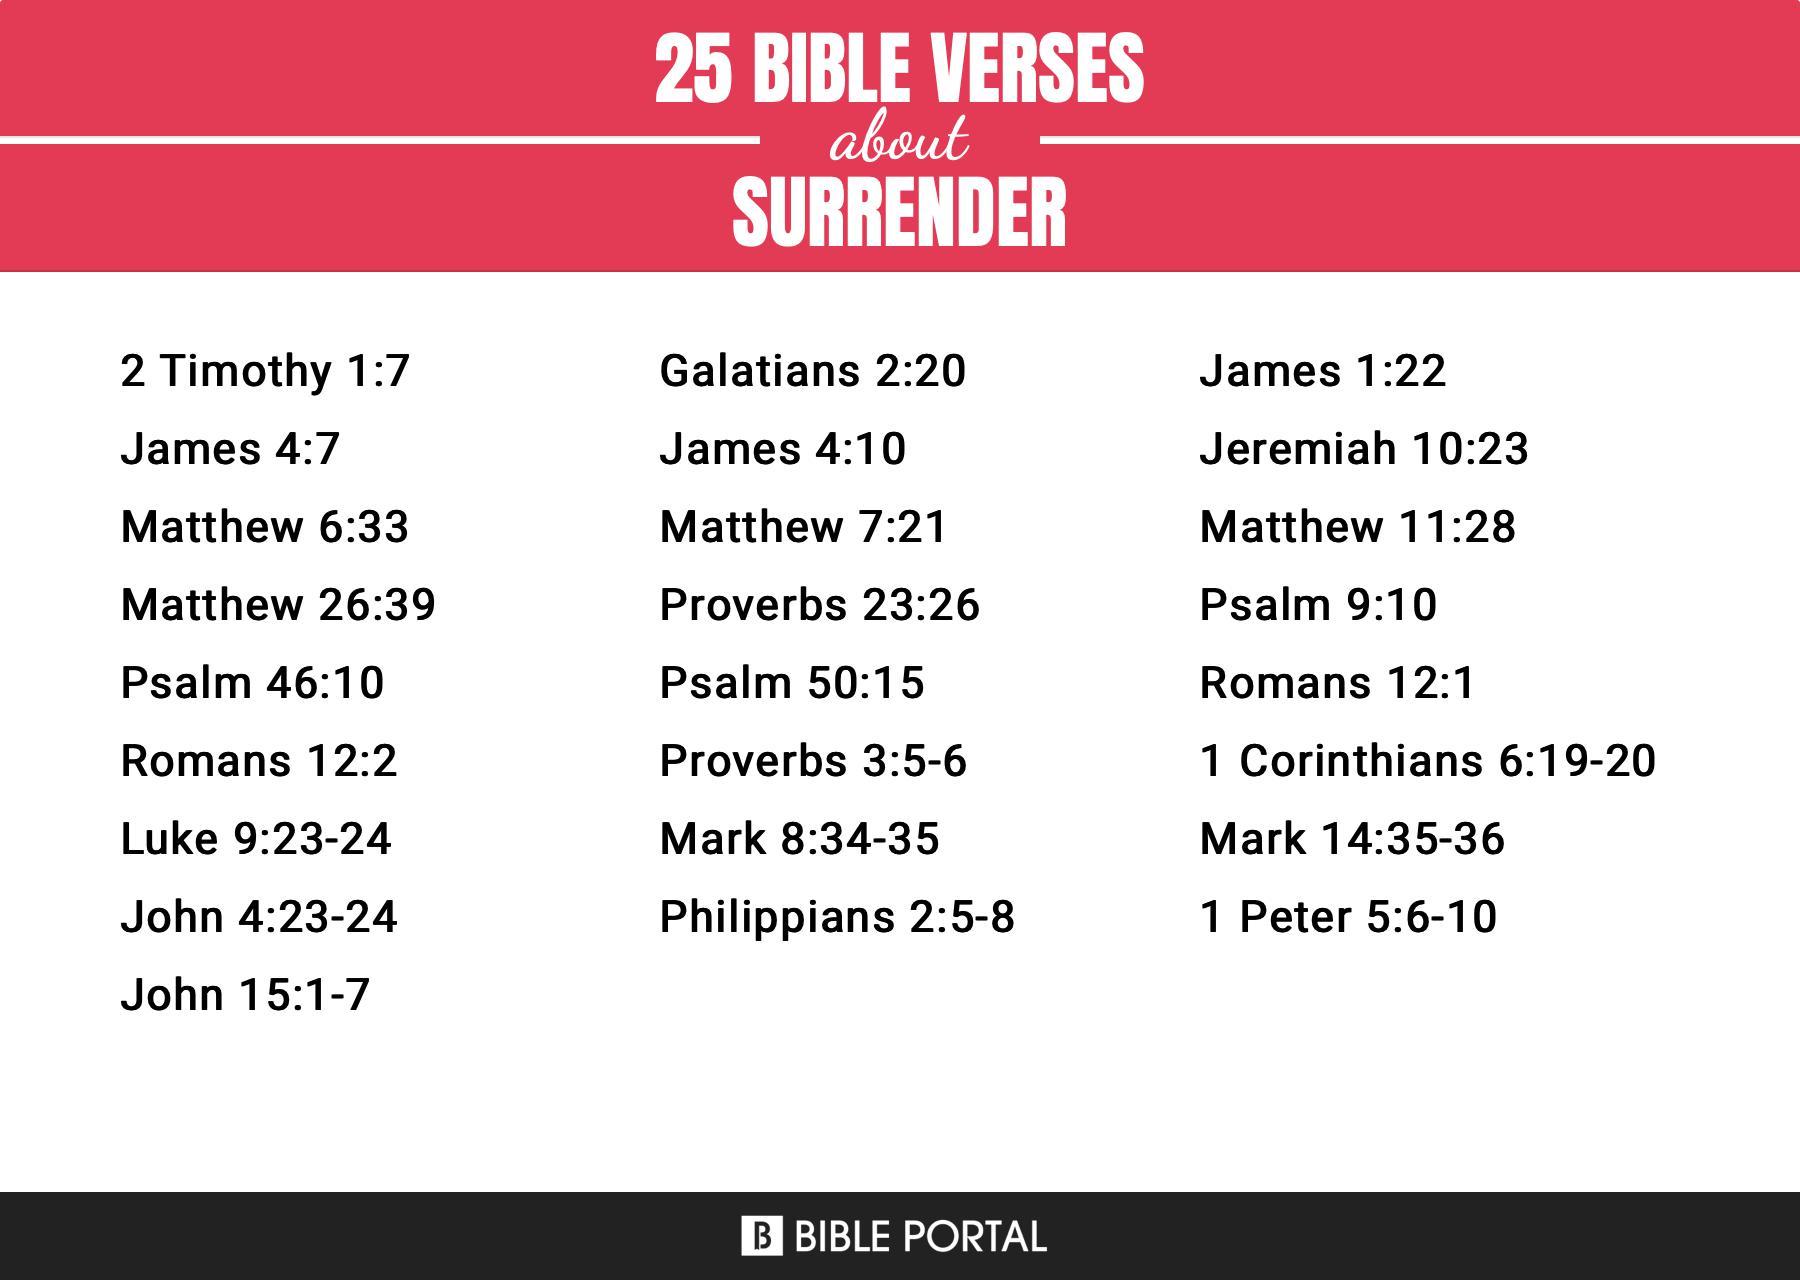 What Does the Bible Say about Surrender?